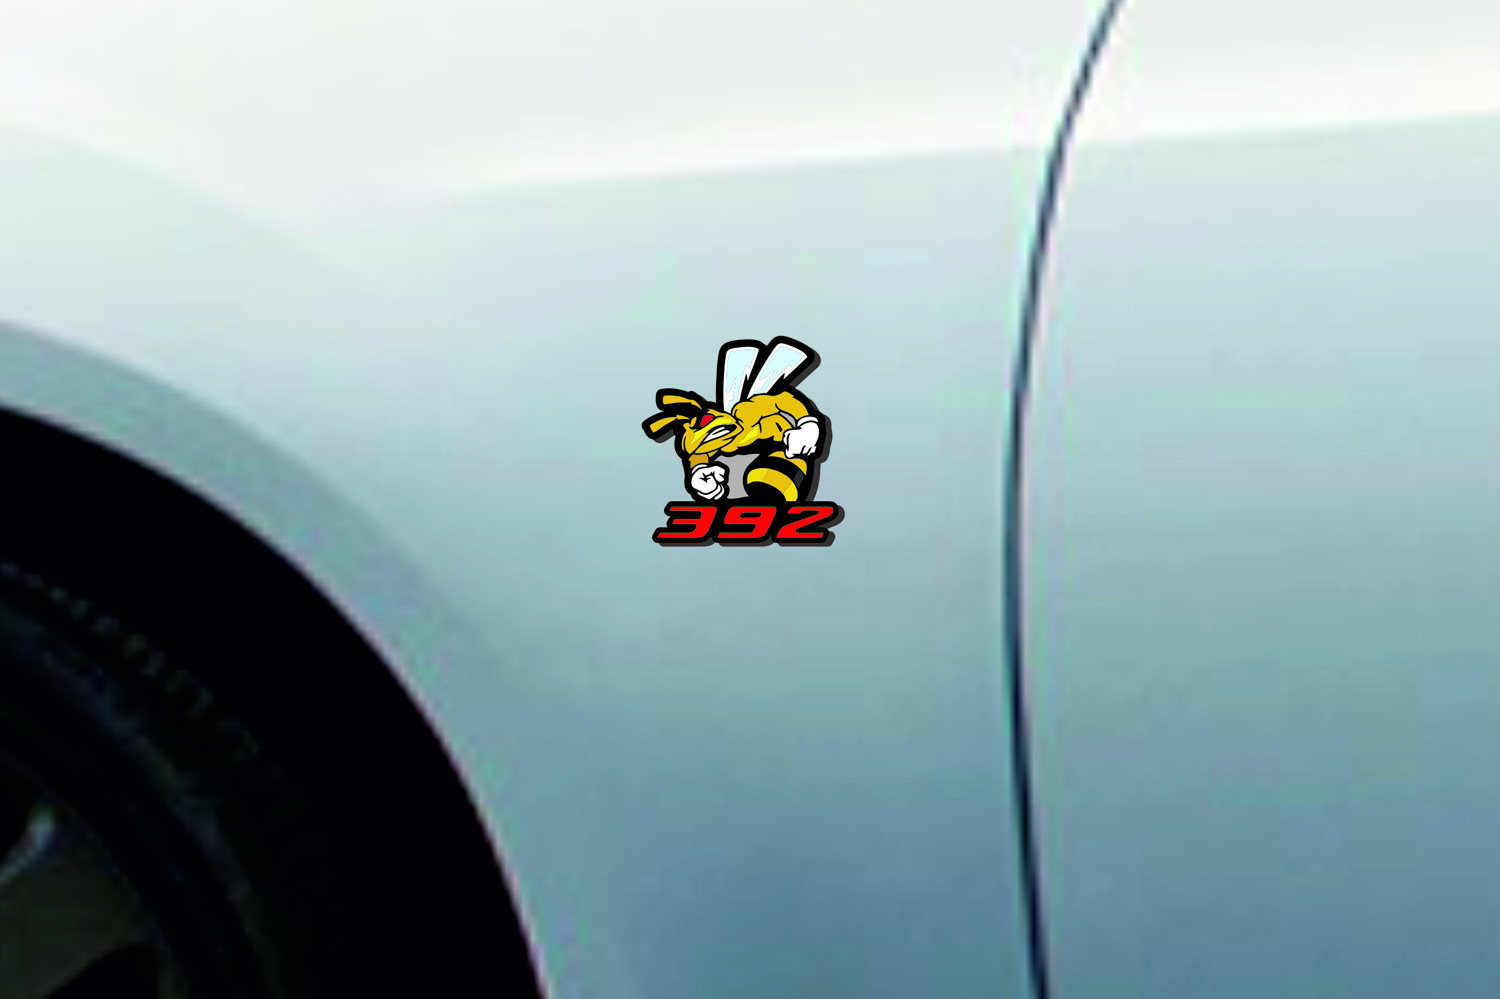 DODGE emblem for fenders with Strong Bee + 392 logo